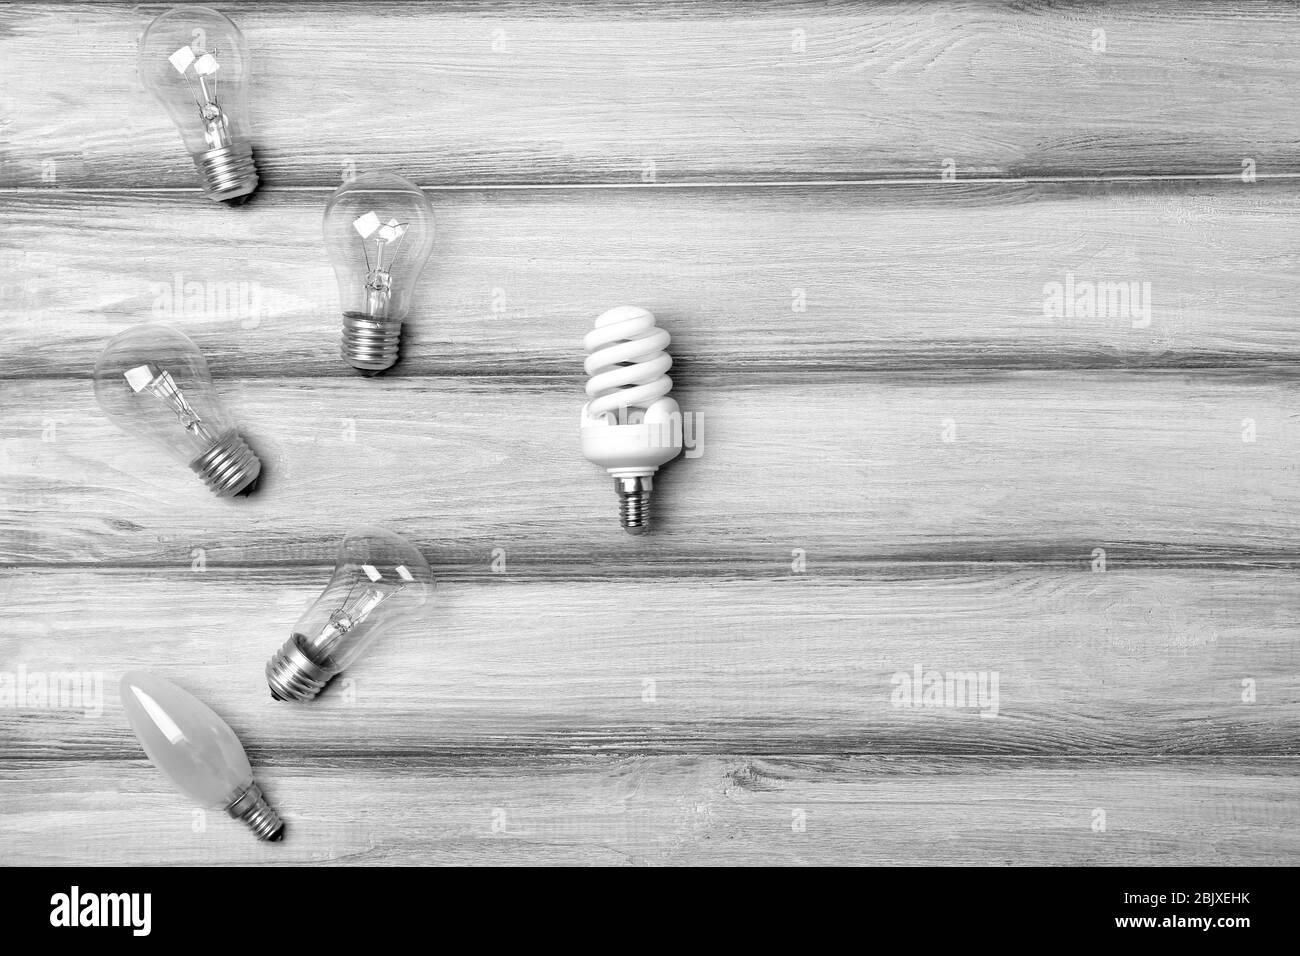 Fluorescent and incandescent lamps on wooden background Stock Photo